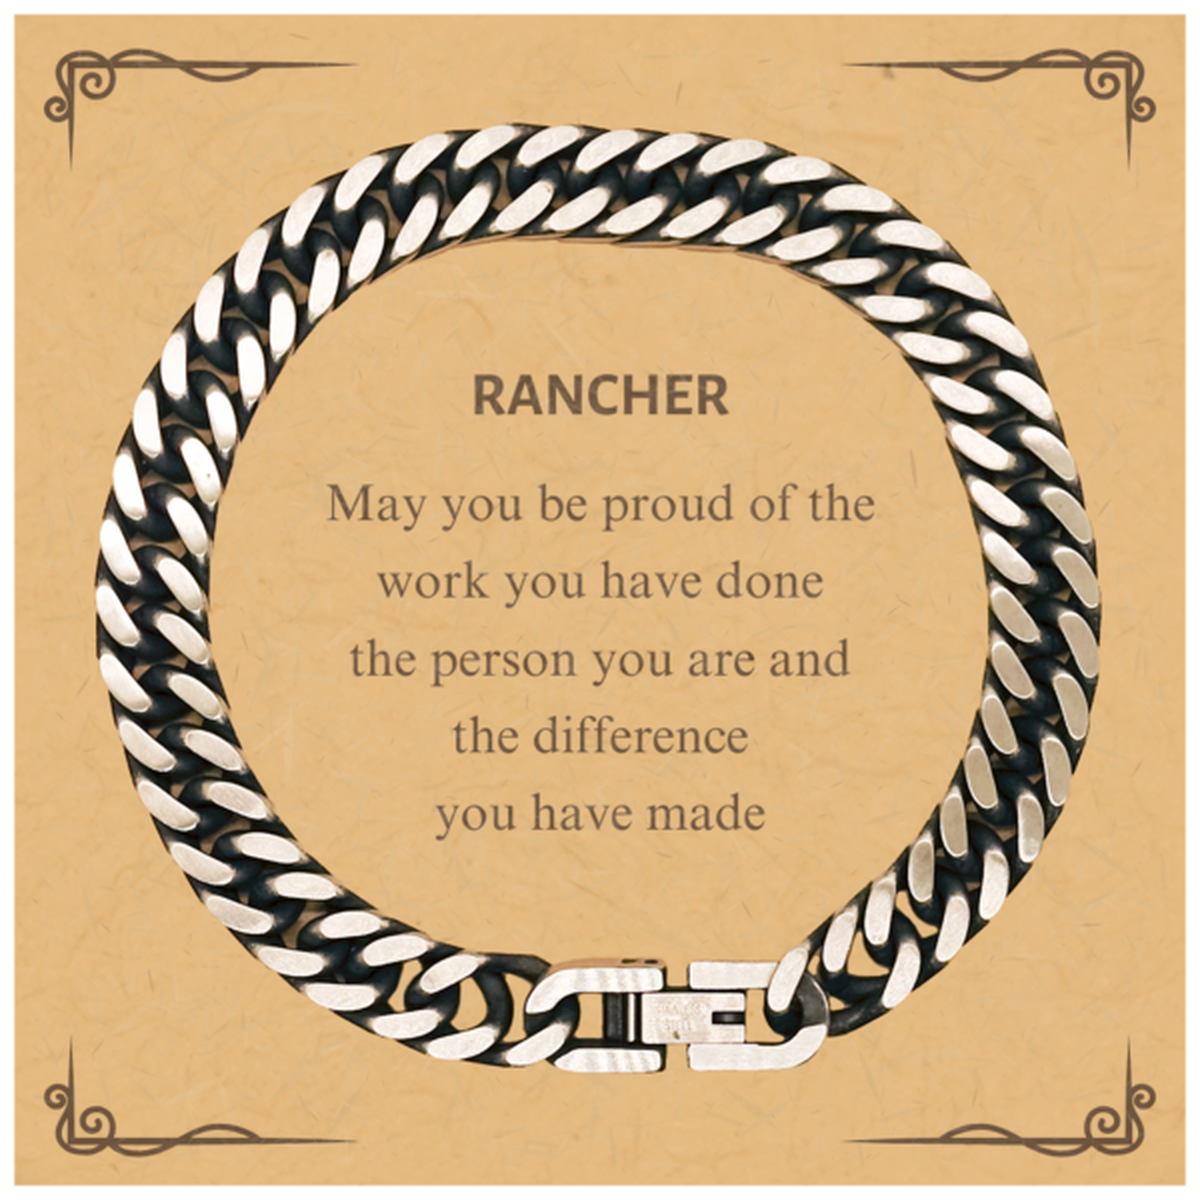 Rancher May you be proud of the work you have done, Retirement Rancher Cuban Link Chain Bracelet for Colleague Appreciation Gifts Amazing for Rancher